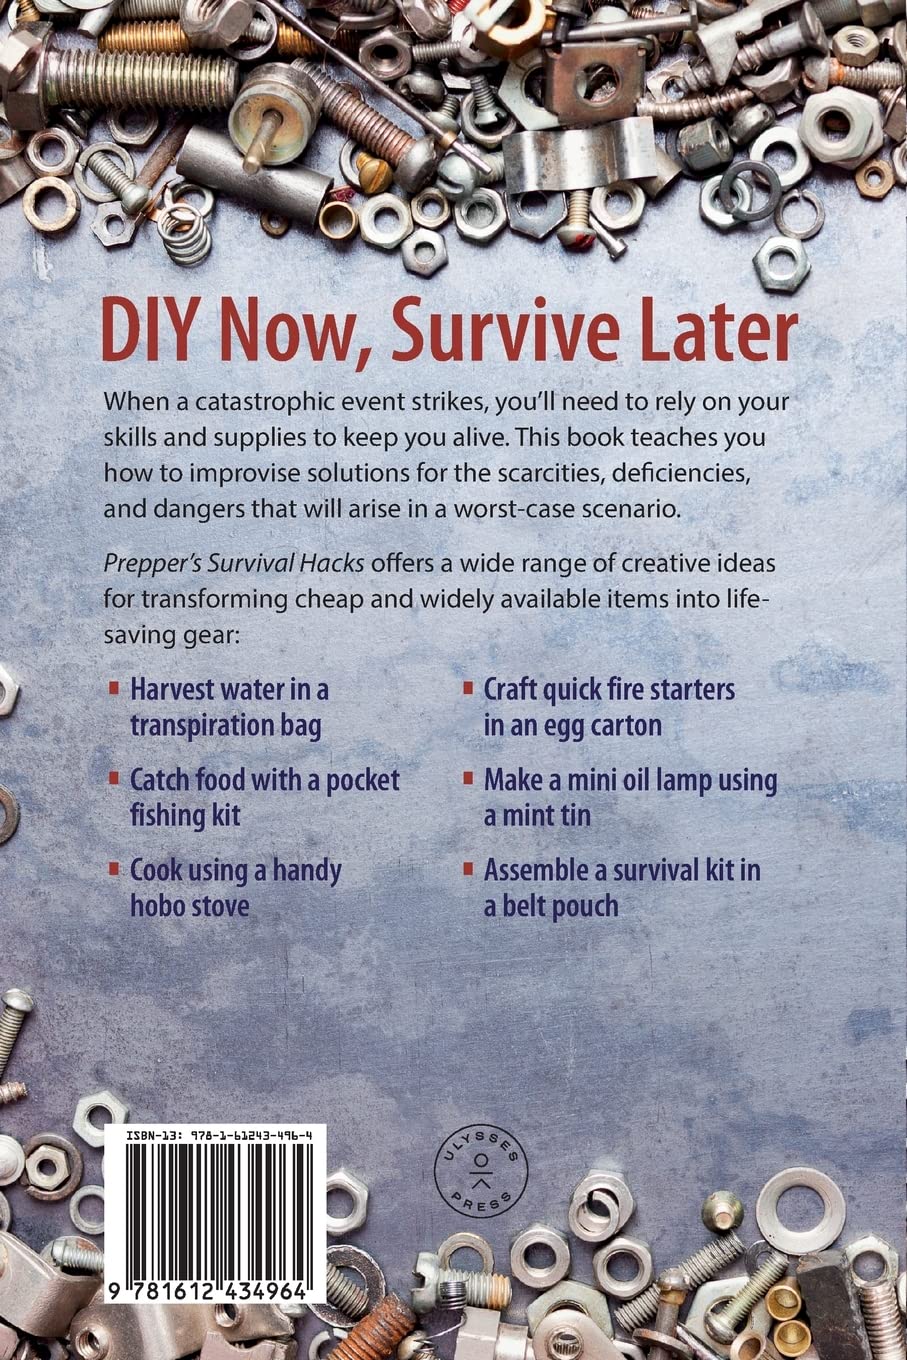 Prepper's Survival Hacks: 50 DIY Projects for Lifesaving Gear, Gadgets and Kits